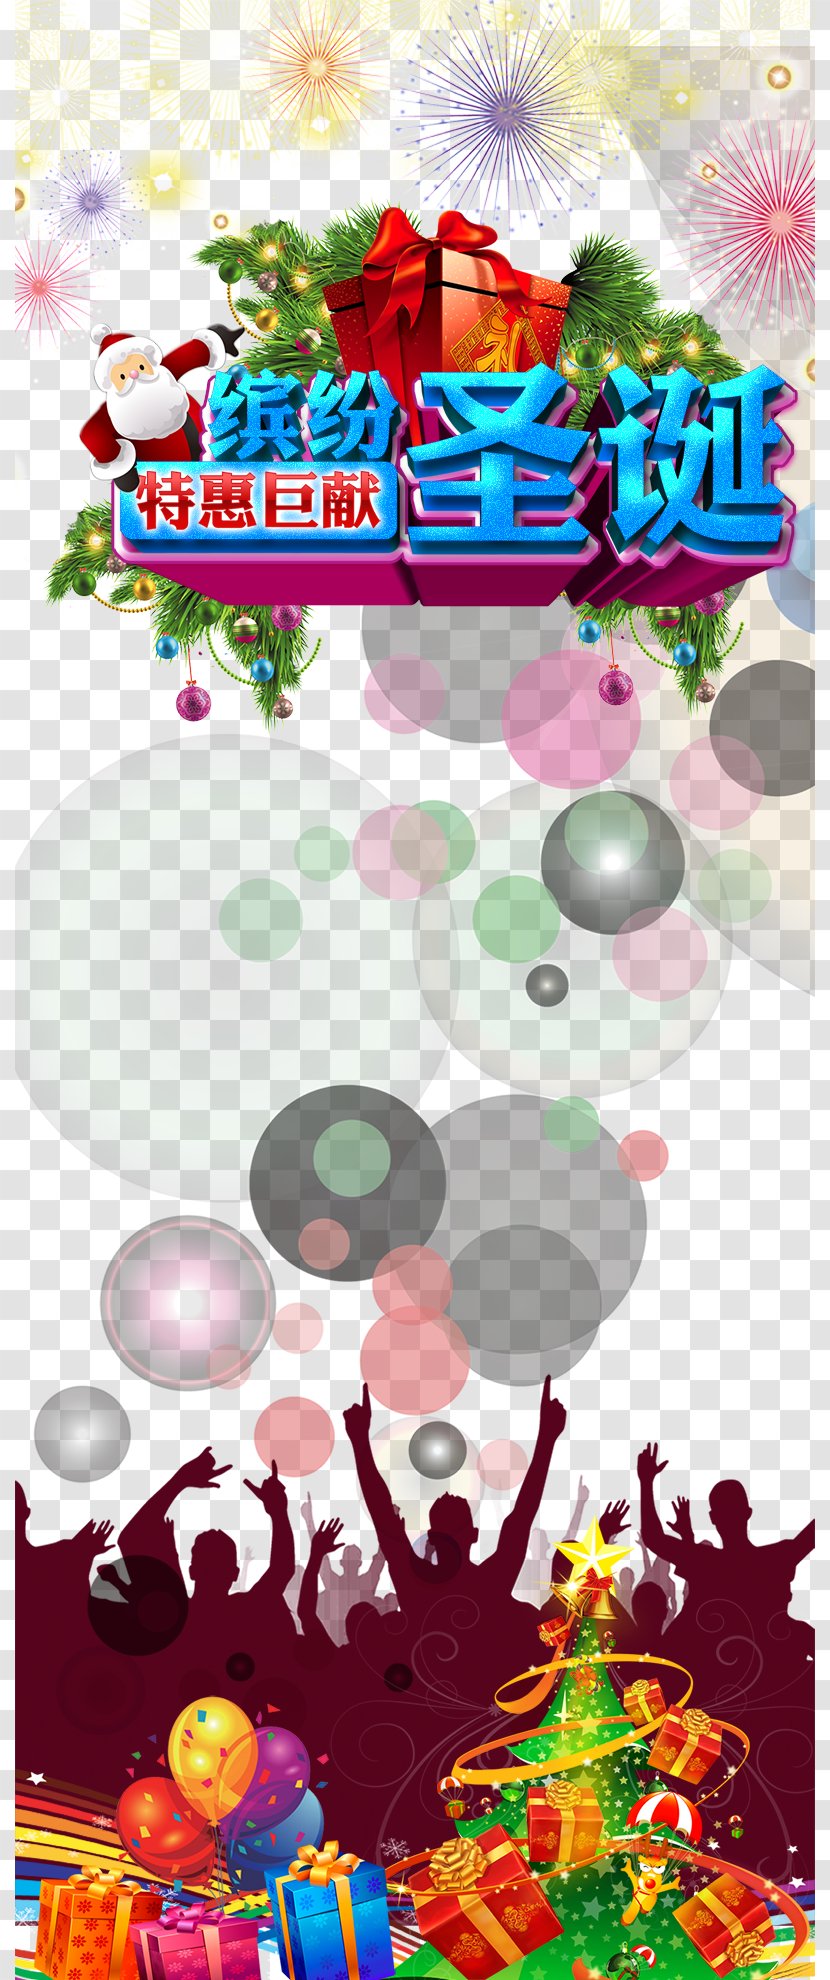 Christmas Poster Illustration - Tree - Fun Background Picture Material Transparent PNG